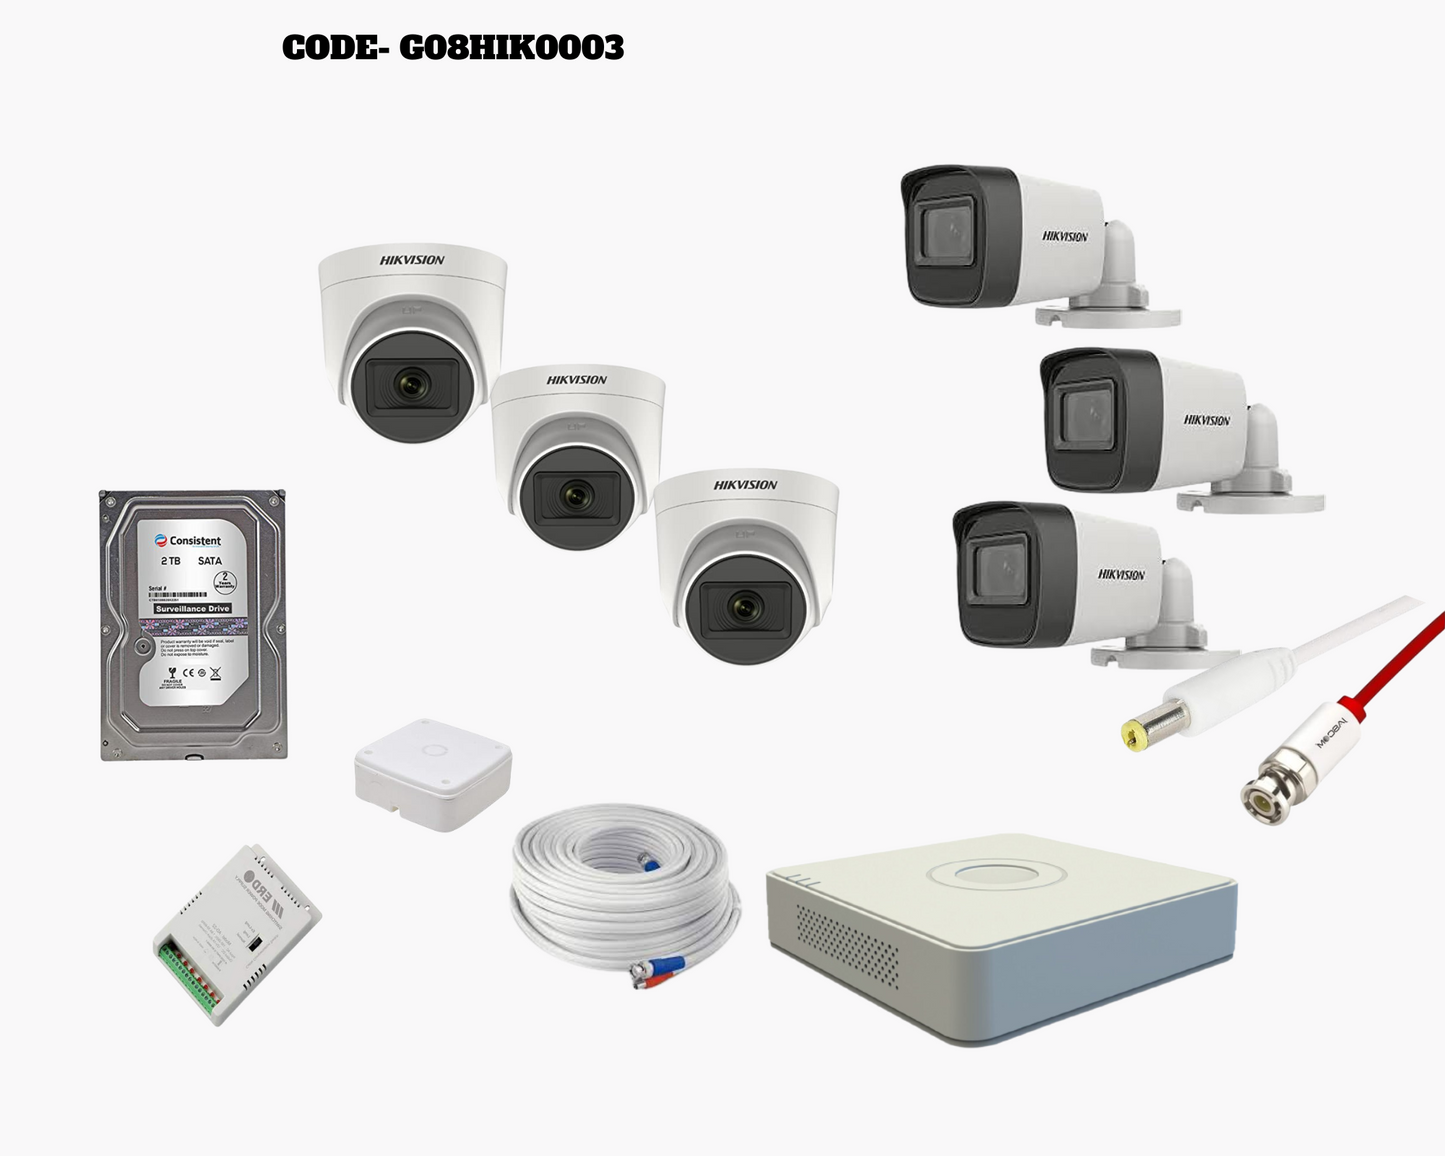 HIKVISION 5MP CCTV CAMERA KIT 4 CHANNEL DVR 3 DOME 3 BULLET CAMERAS WITH AUDIO MIC FULL COMBO KIT CODE:- G04HIK0003